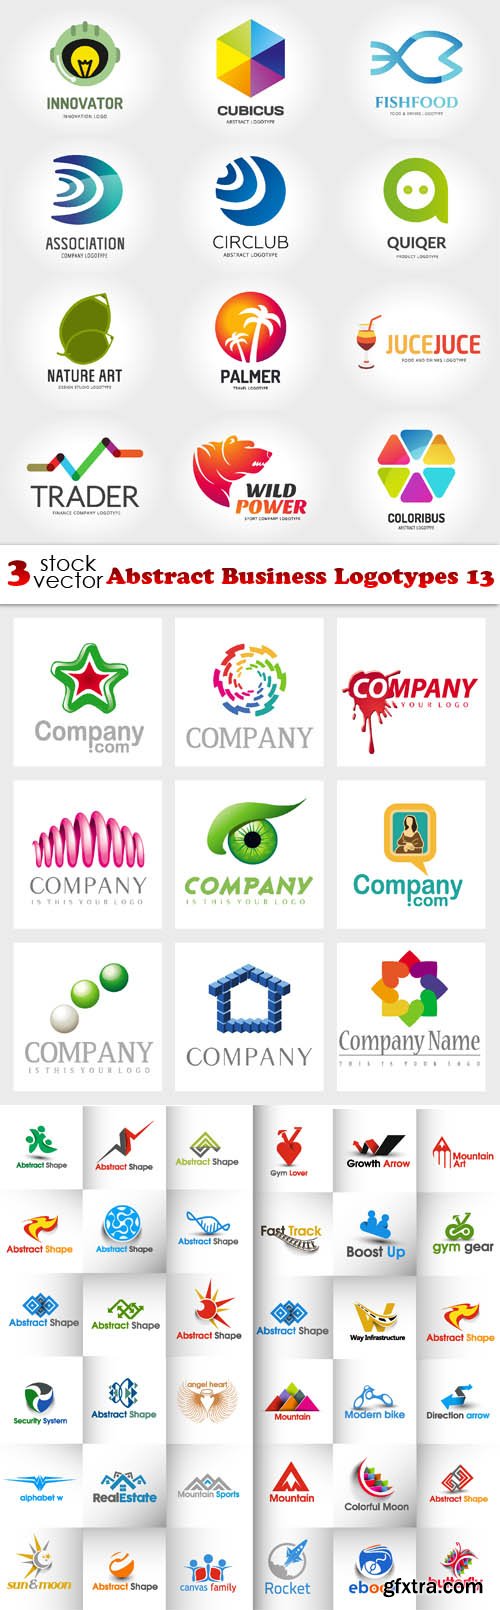 Vectors - Abstract Business Logotypes 13